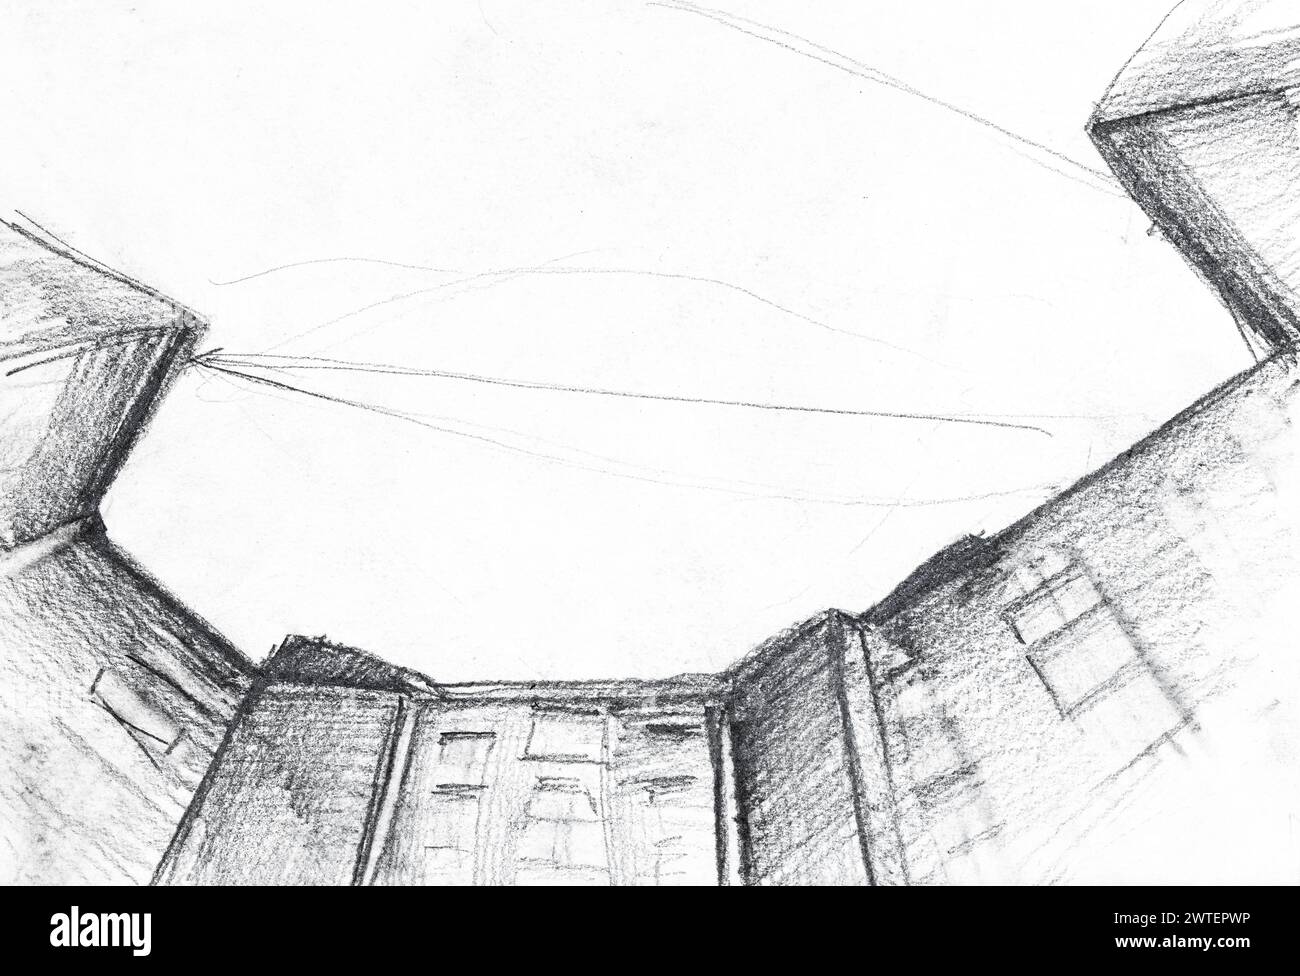 bottom view of high-rise apartment buildings drawn by hand in graphite pencil on white paper. Moscow, Russia Stock Photo